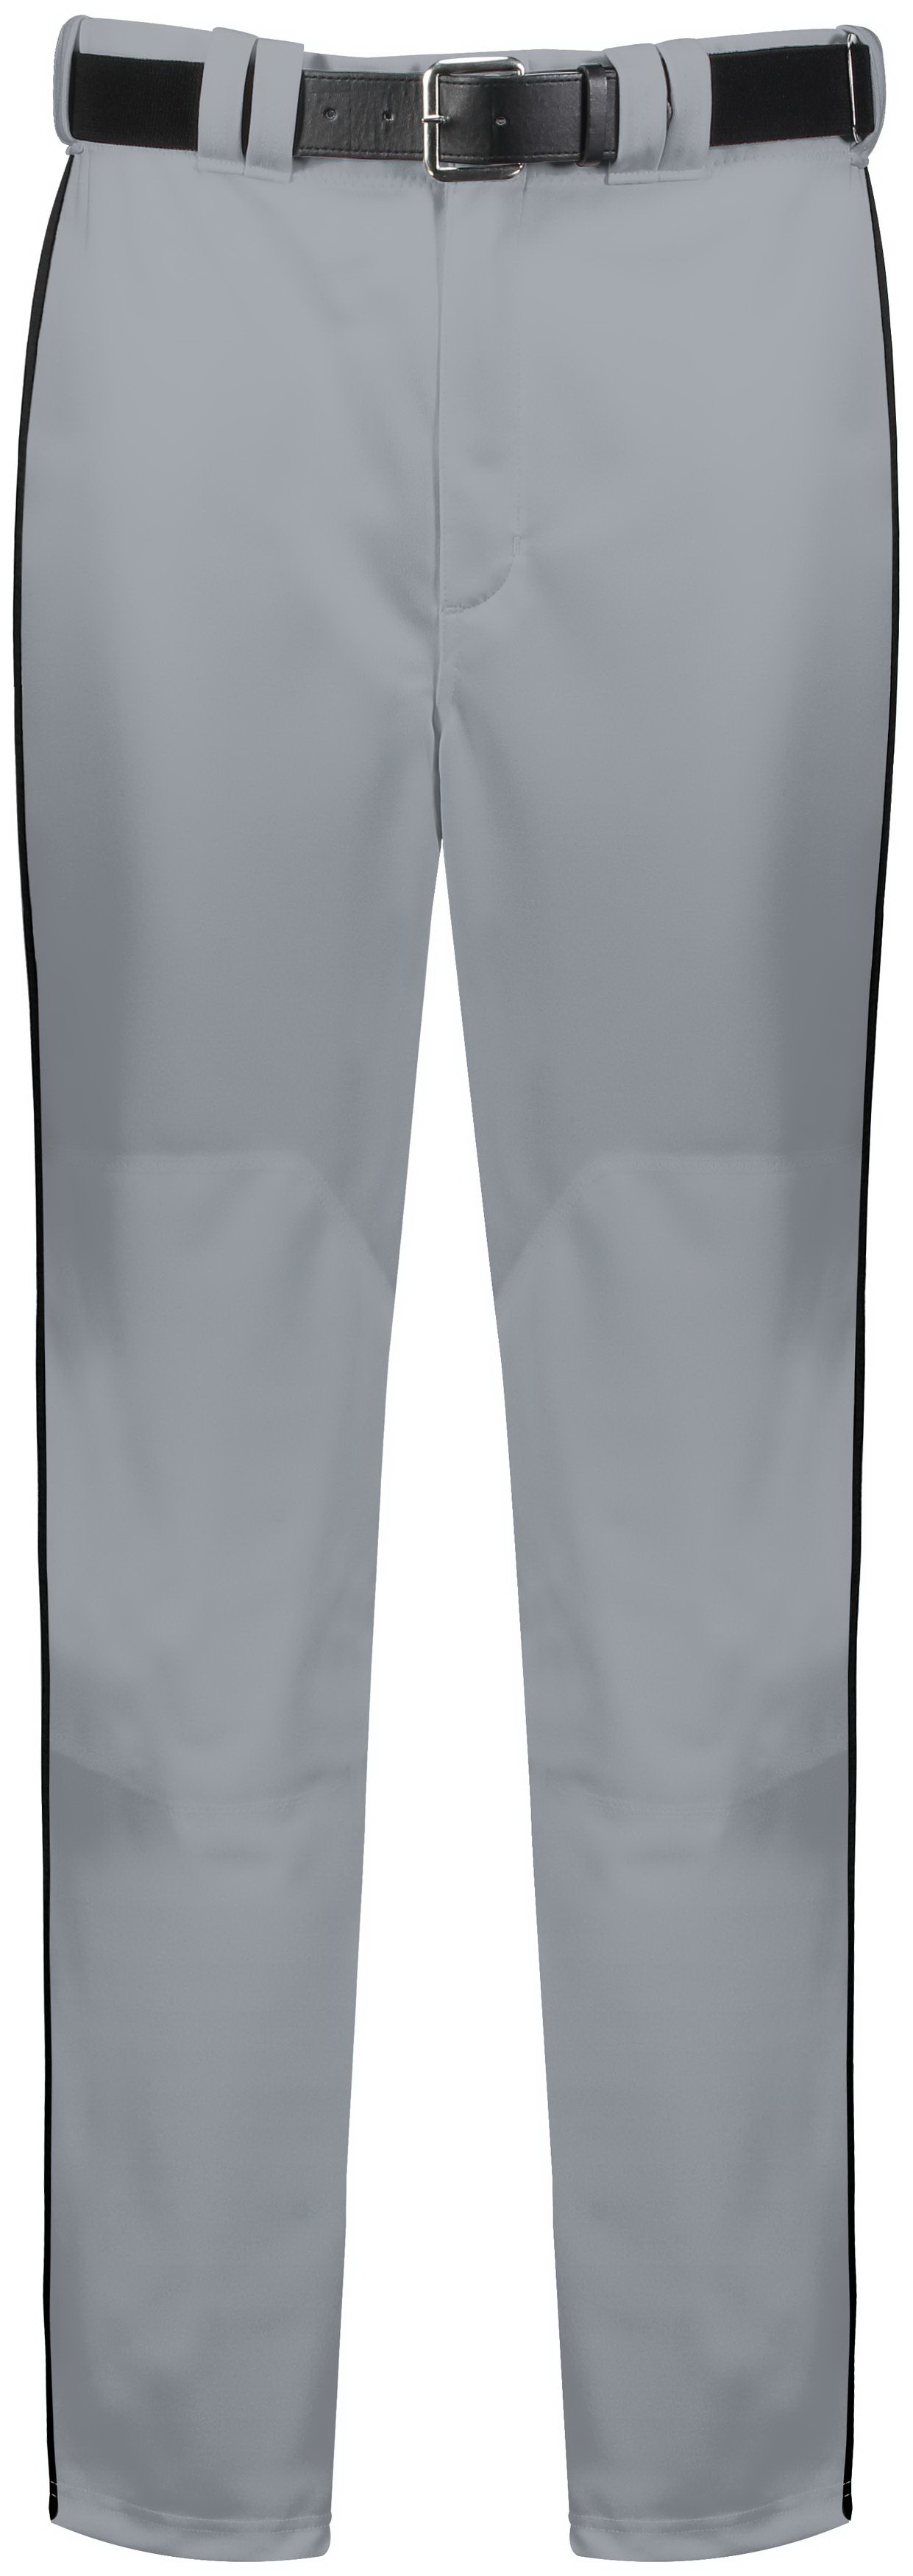 Champro Men's Triple Crown 2.0 Tapered Bottom with Braid Baseball Pants, White/ Navy / L